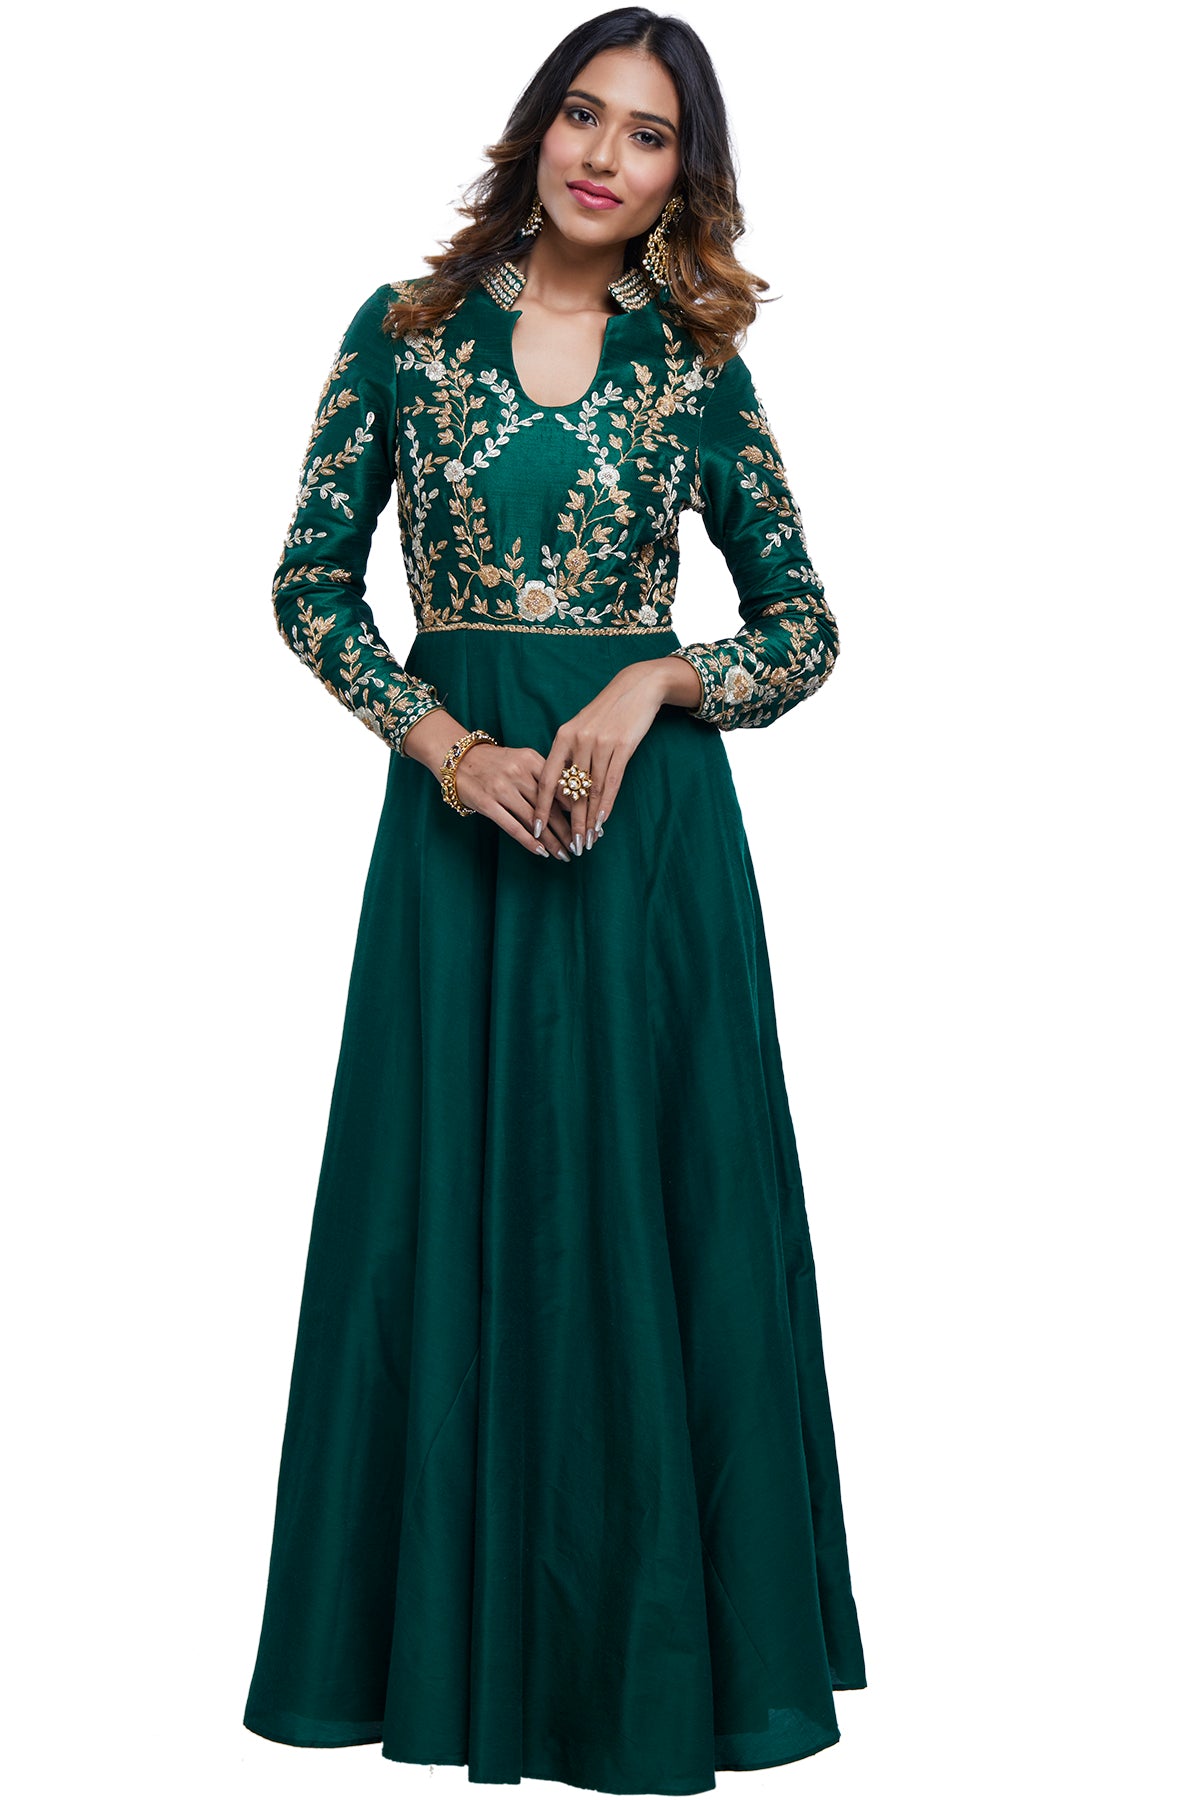 Bottle Green Embroidered Georgette Gown with Dupatta